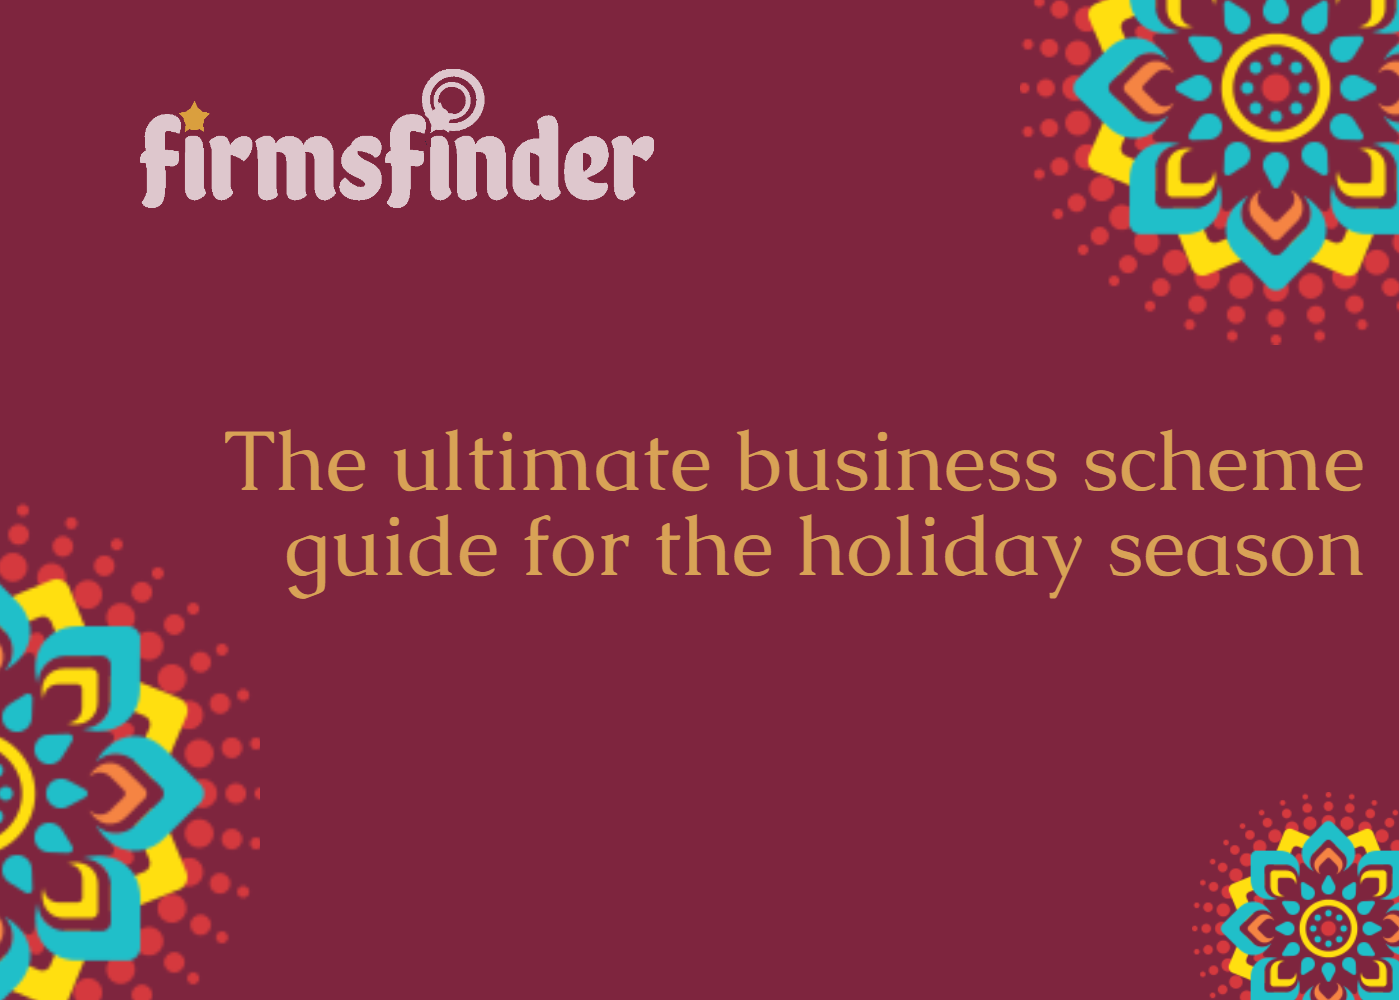 The ultimate business scheme guide for the holiday season